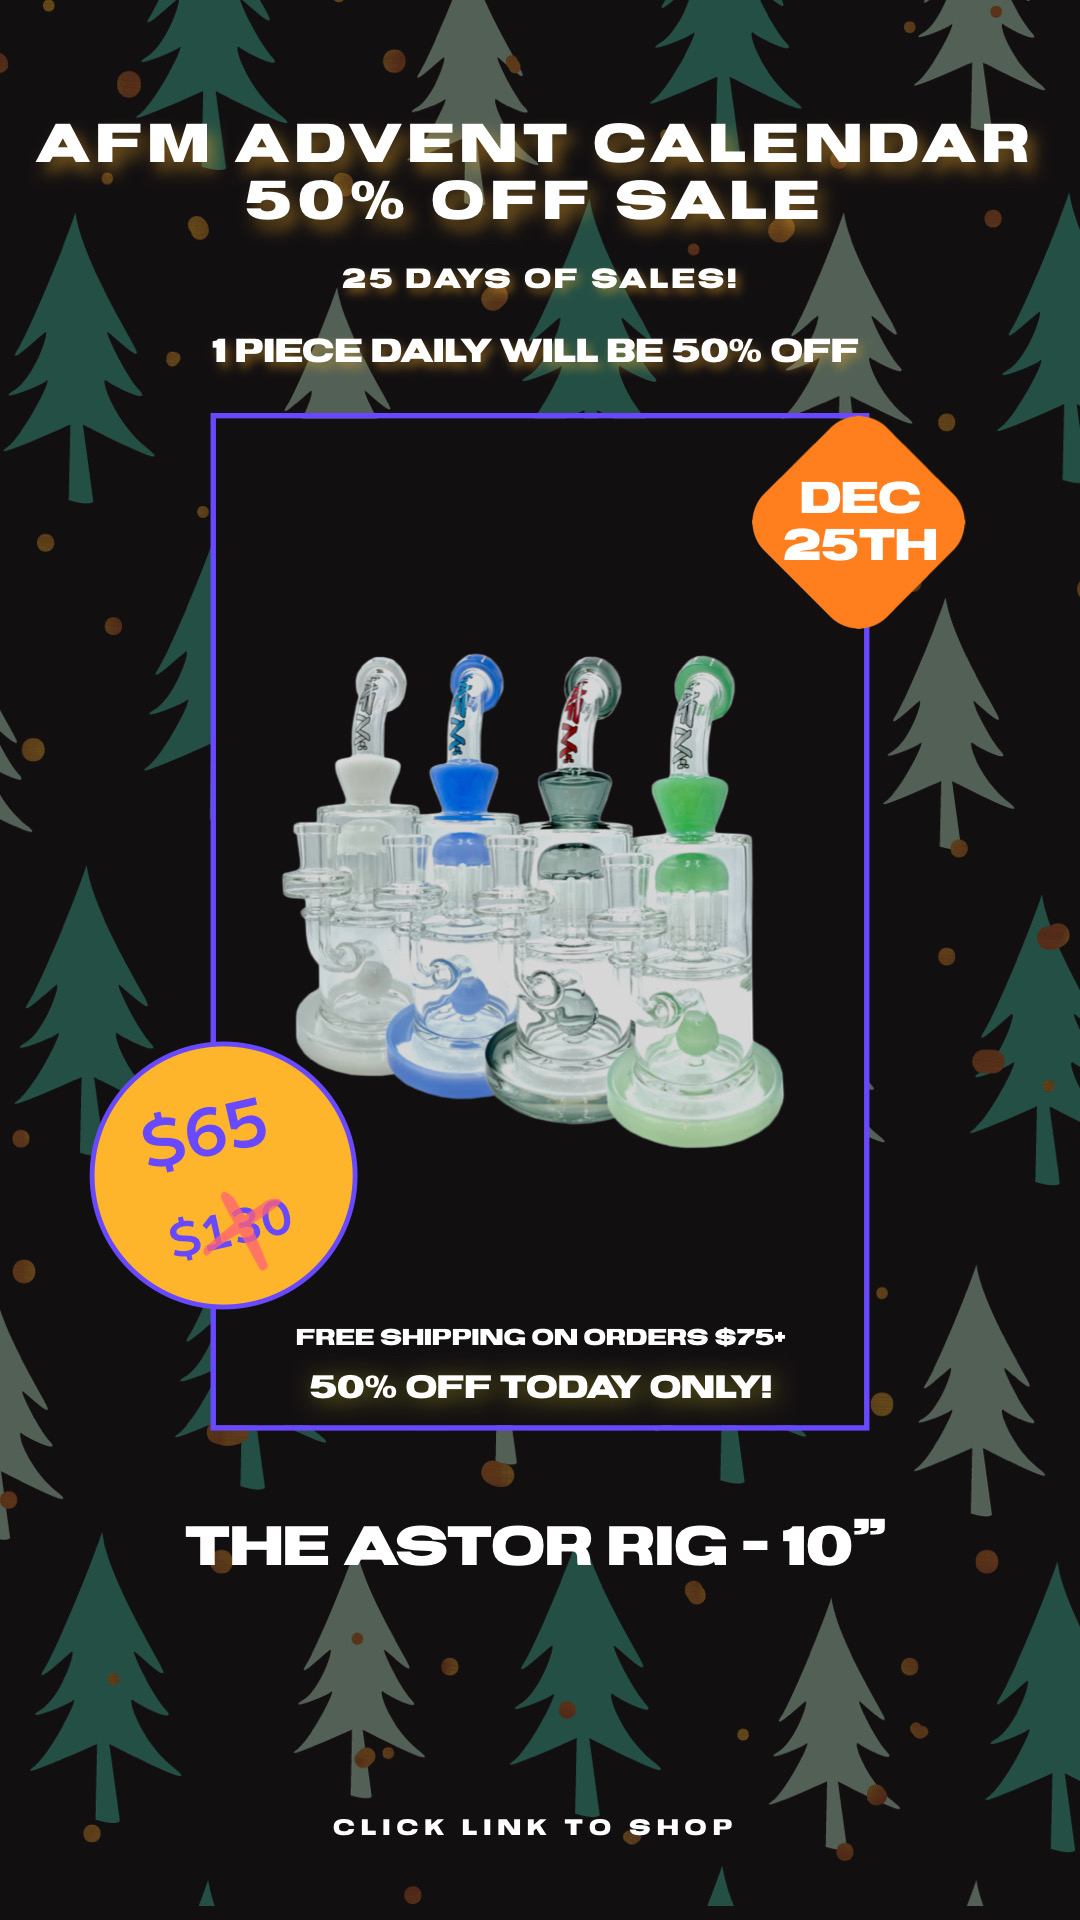 AFM ADVENT CALENDAR 50% OFF SALE 25 DAYS OF SALES! 1PIECE DAILY WILL BE 50% OFF FREE SHIPPING ON ORDERS $75 50% OFF TODAY ONLLY! THE ASTOR RIG -10 CLICK LINK TO SHOP 